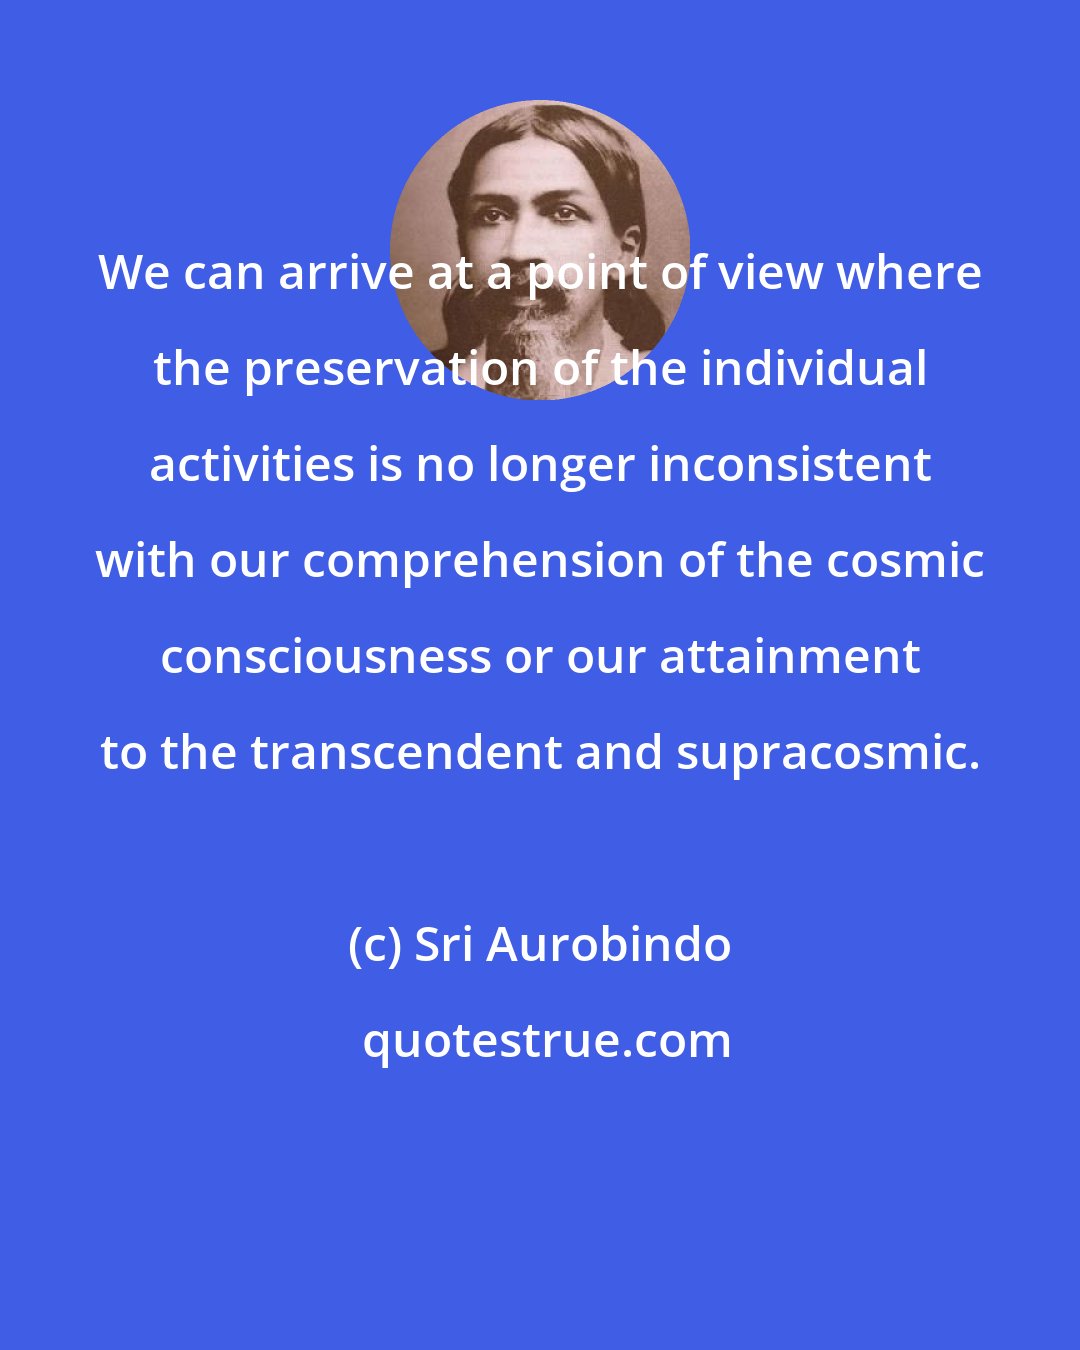 Sri Aurobindo: We can arrive at a point of view where the preservation of the individual activities is no longer inconsistent with our comprehension of the cosmic consciousness or our attainment to the transcendent and supracosmic.